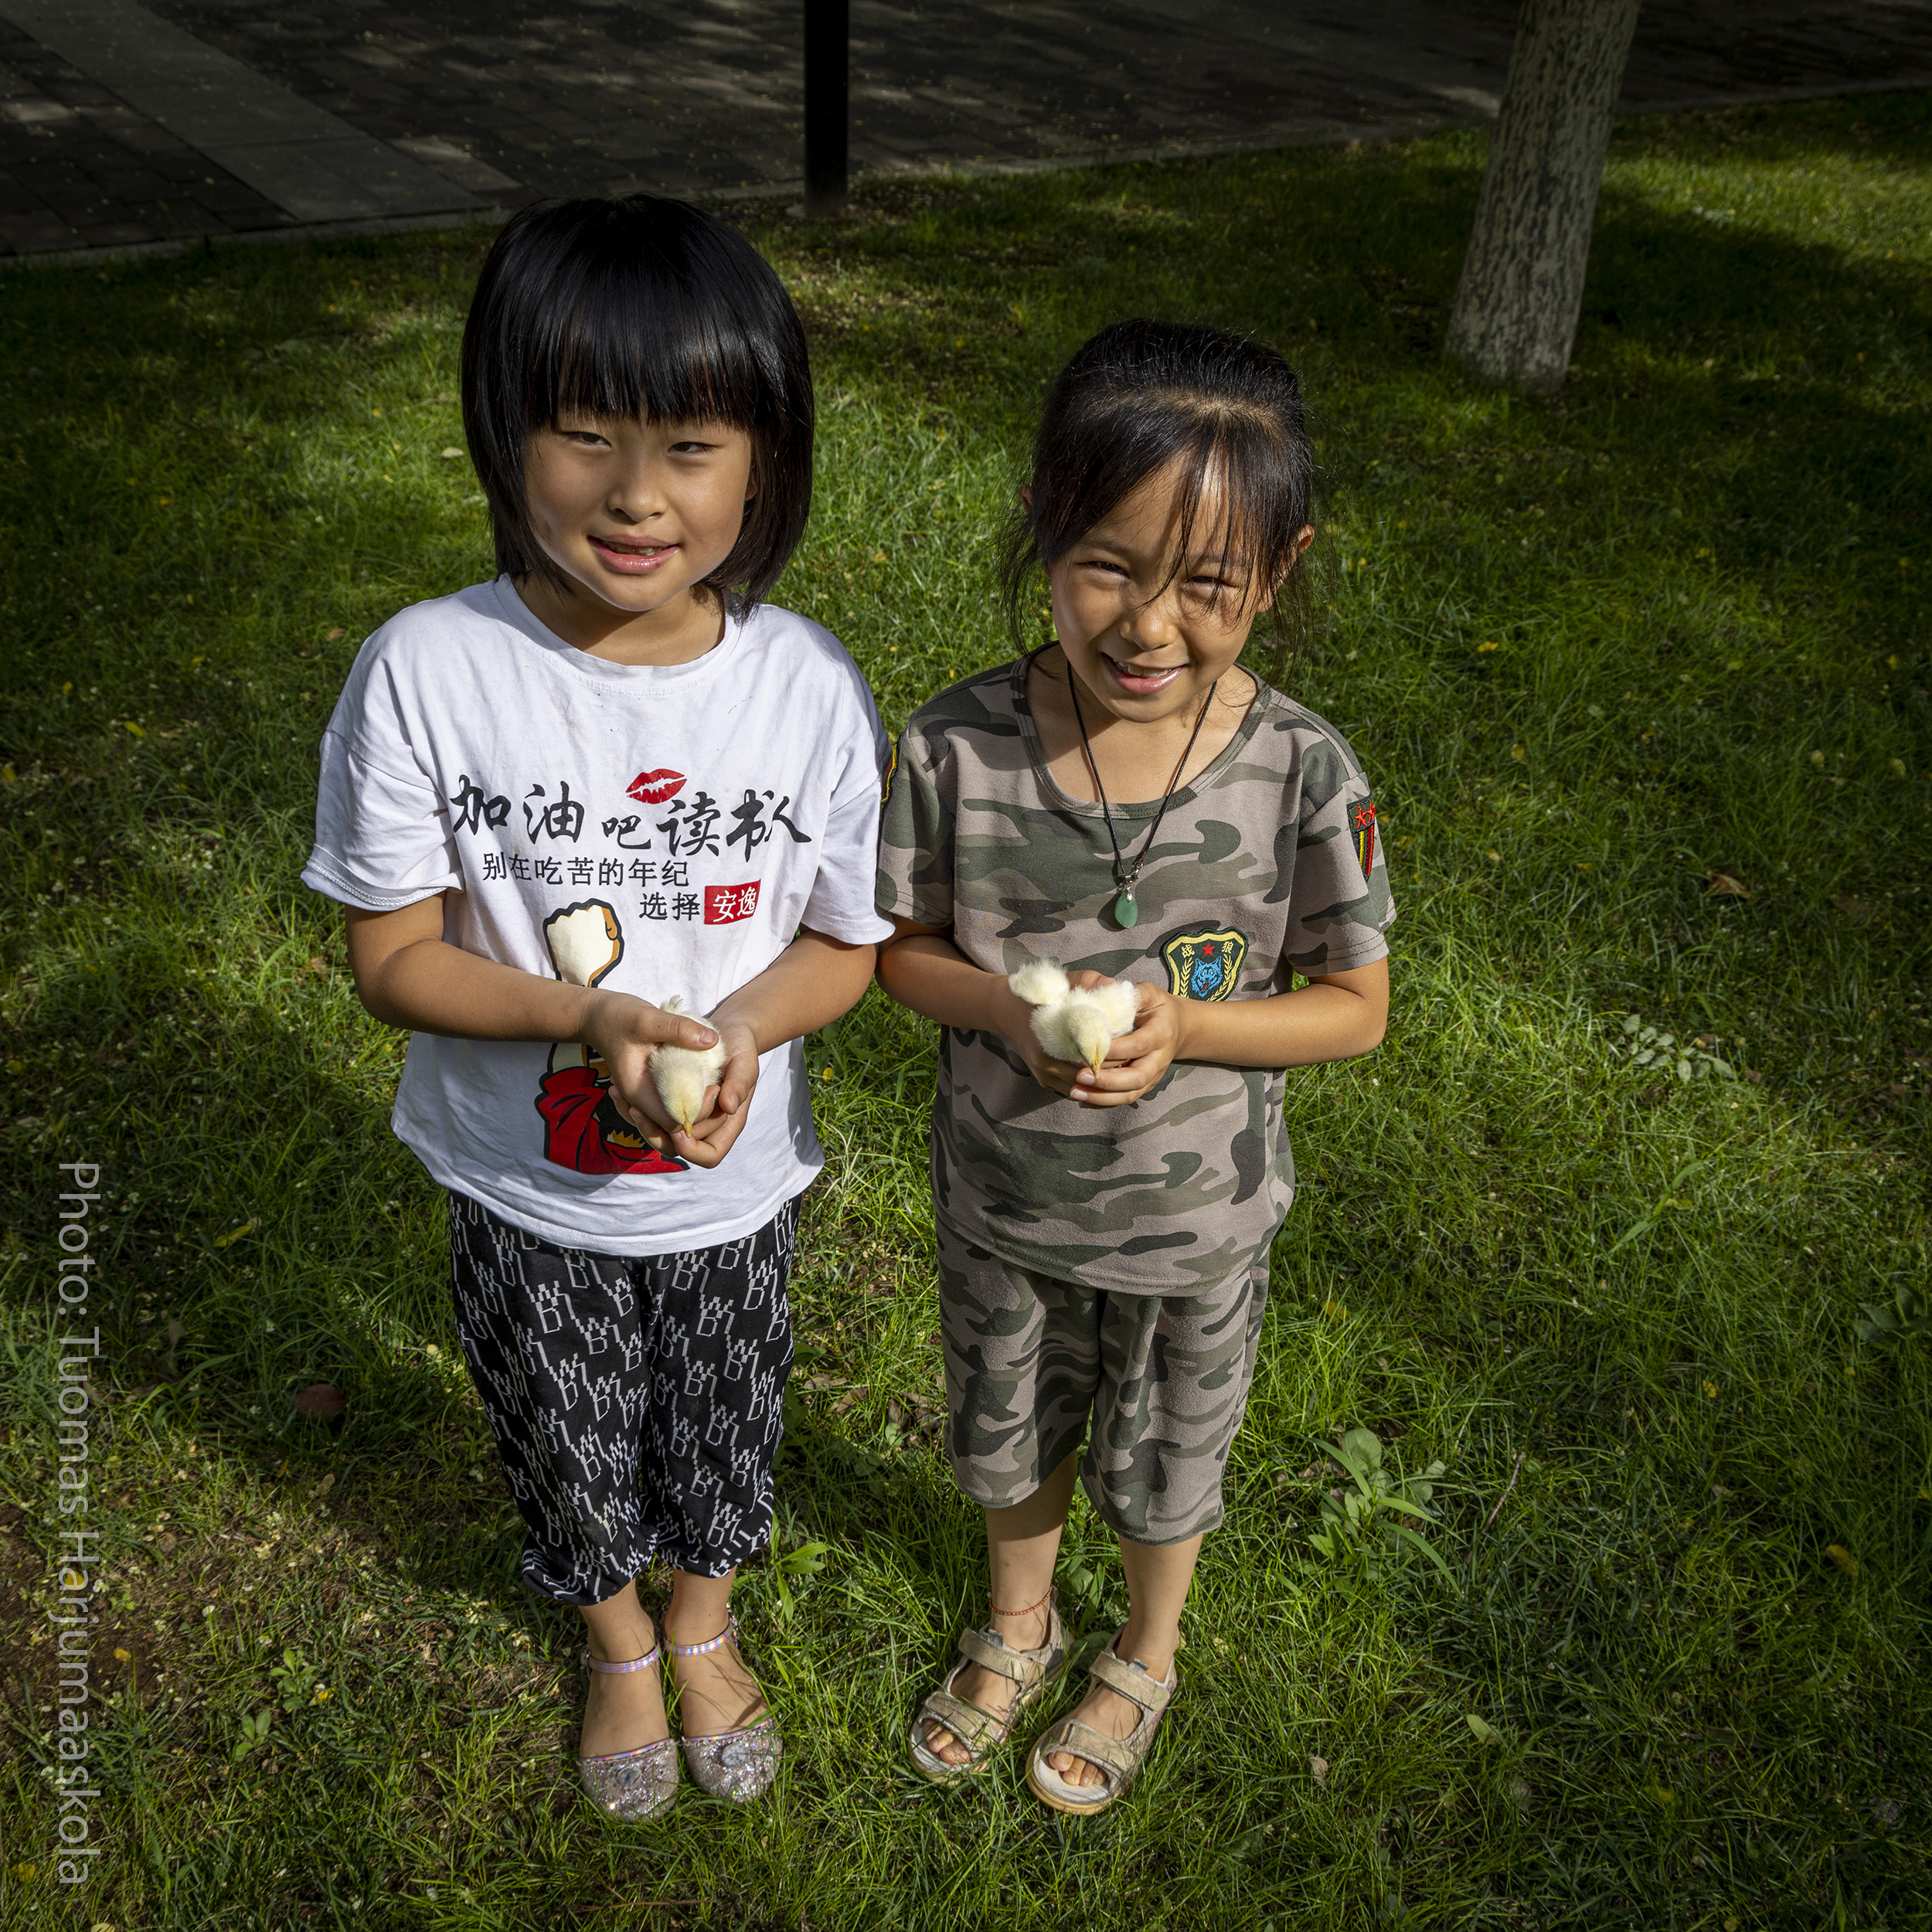 Two Chinese girls holding chicks in their hands at a park. Photographer Tuomas Harjumaaskola.